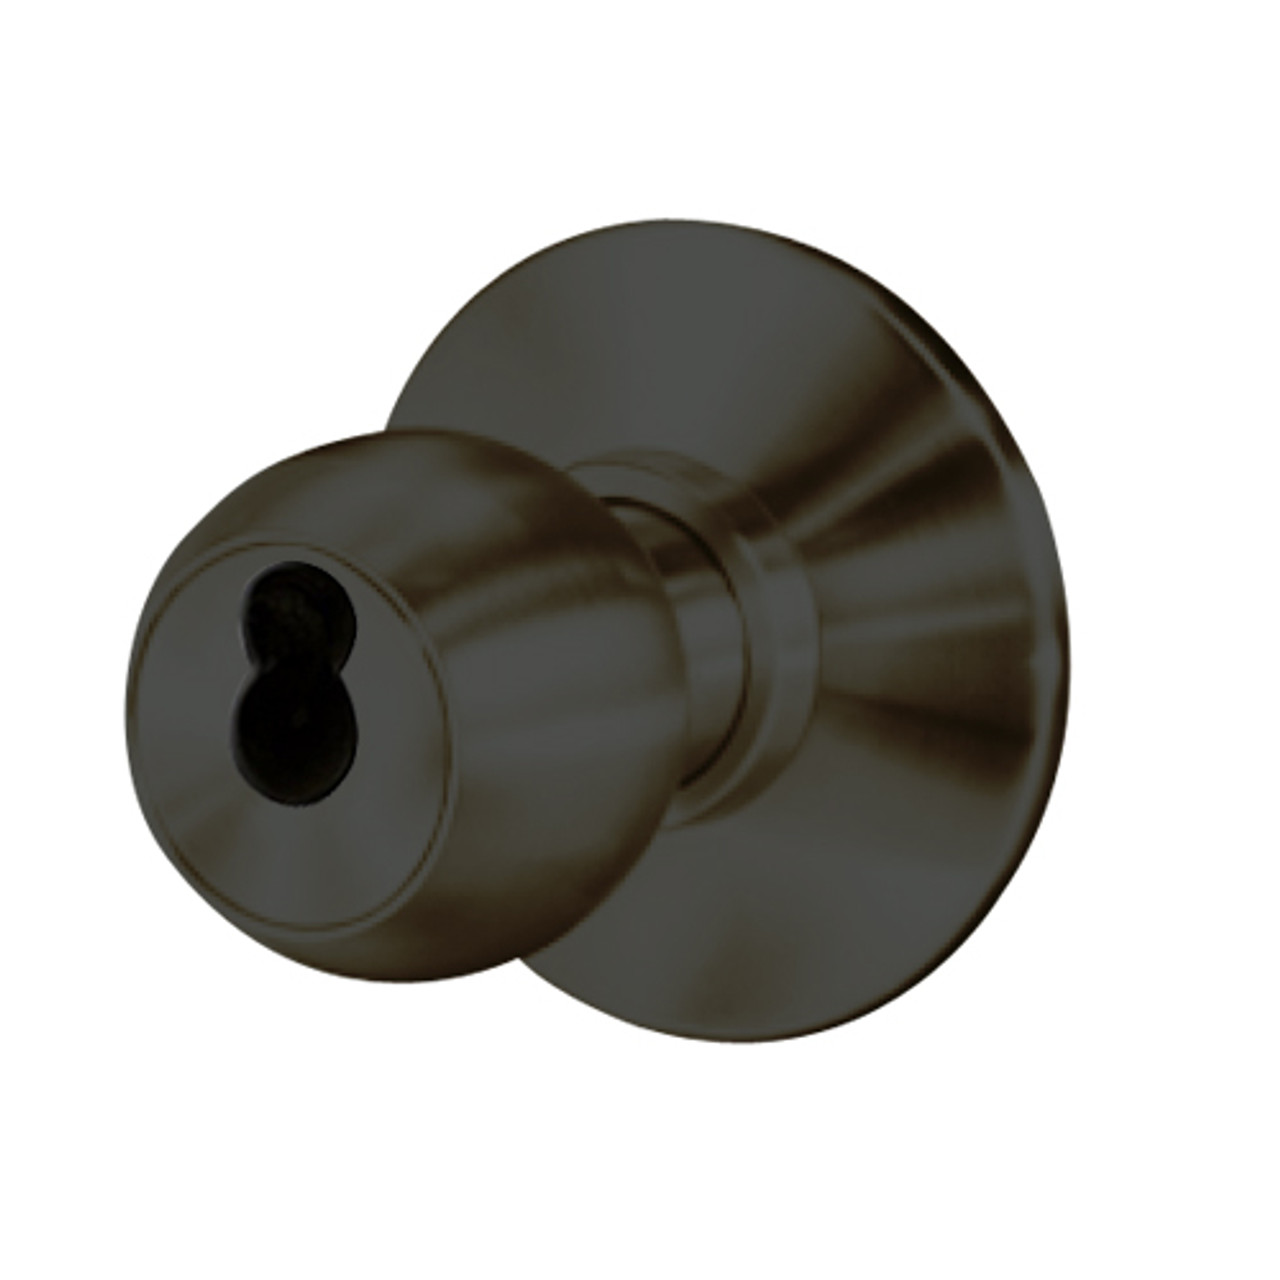 8K47A4DS3613 Best 8K Series Dormitory/Storeroom Heavy Duty Cylindrical Knob Locks with Round Style in Oil Rubbed Bronze